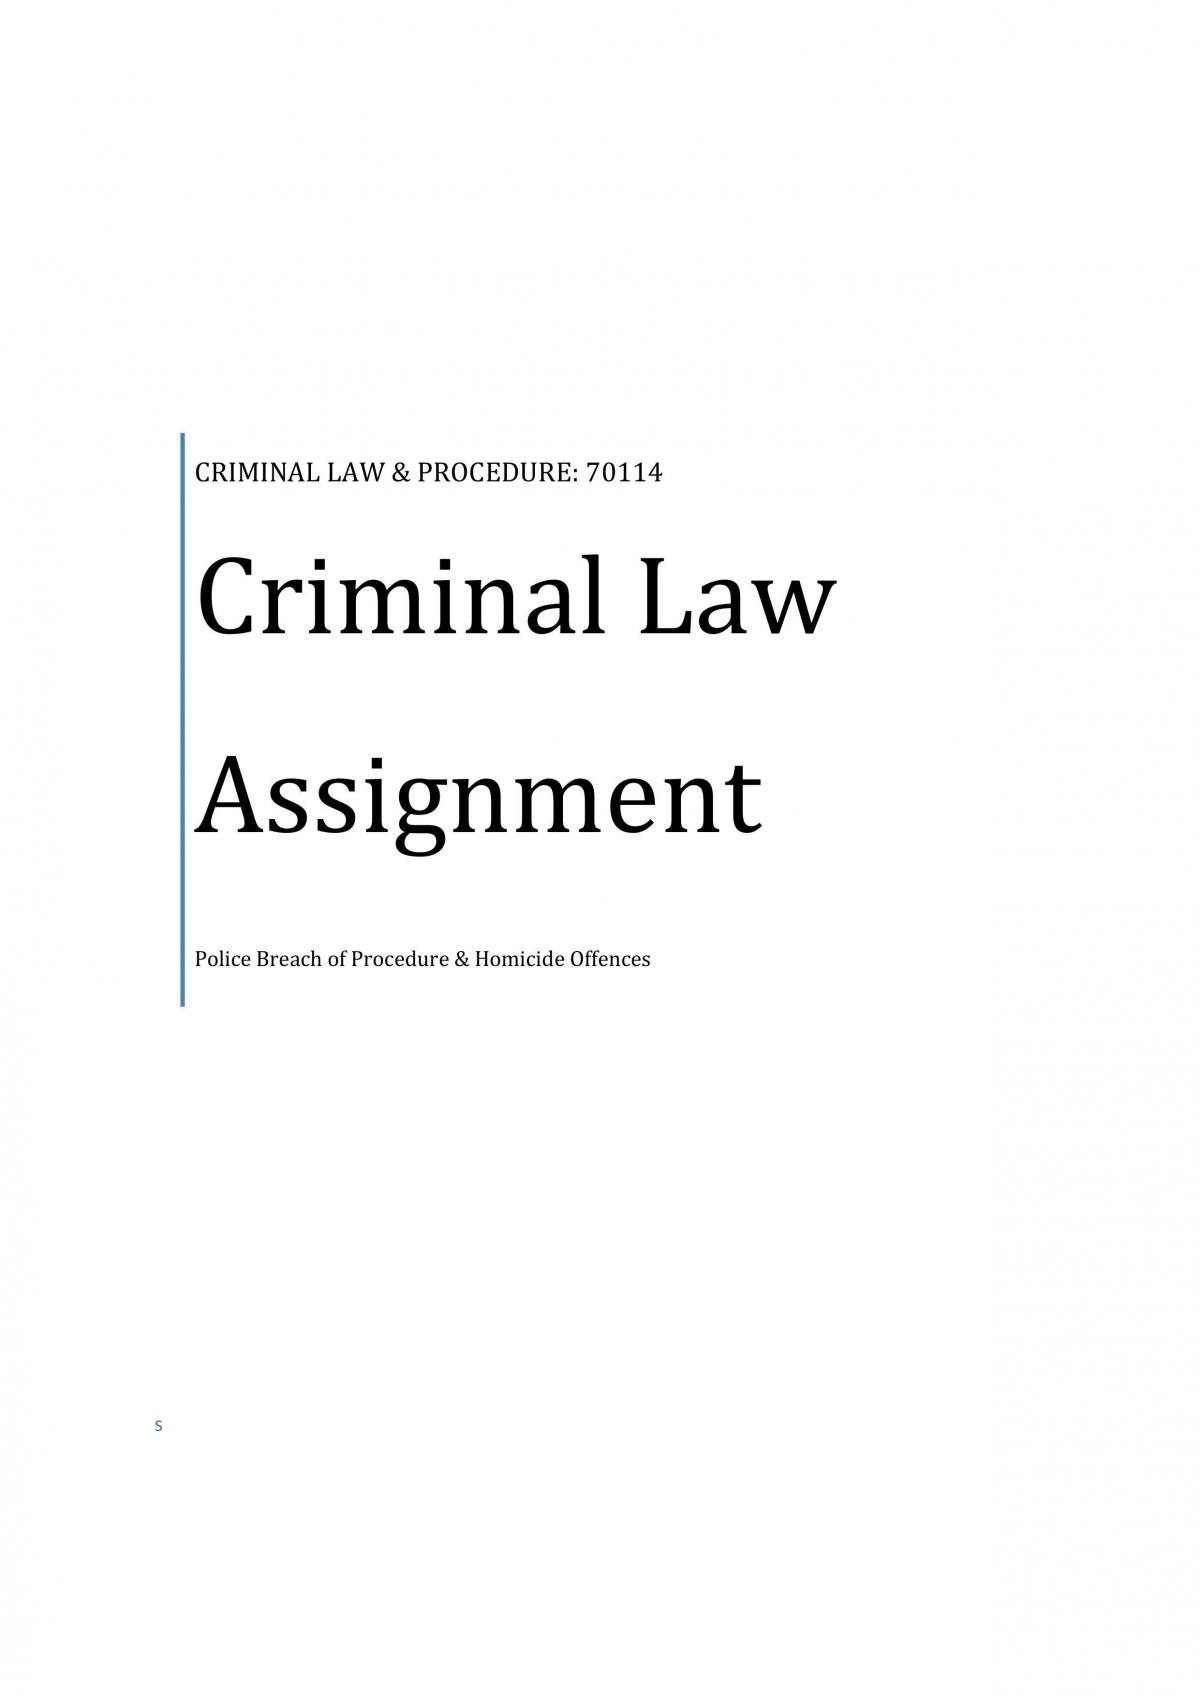 assignment on criminal law